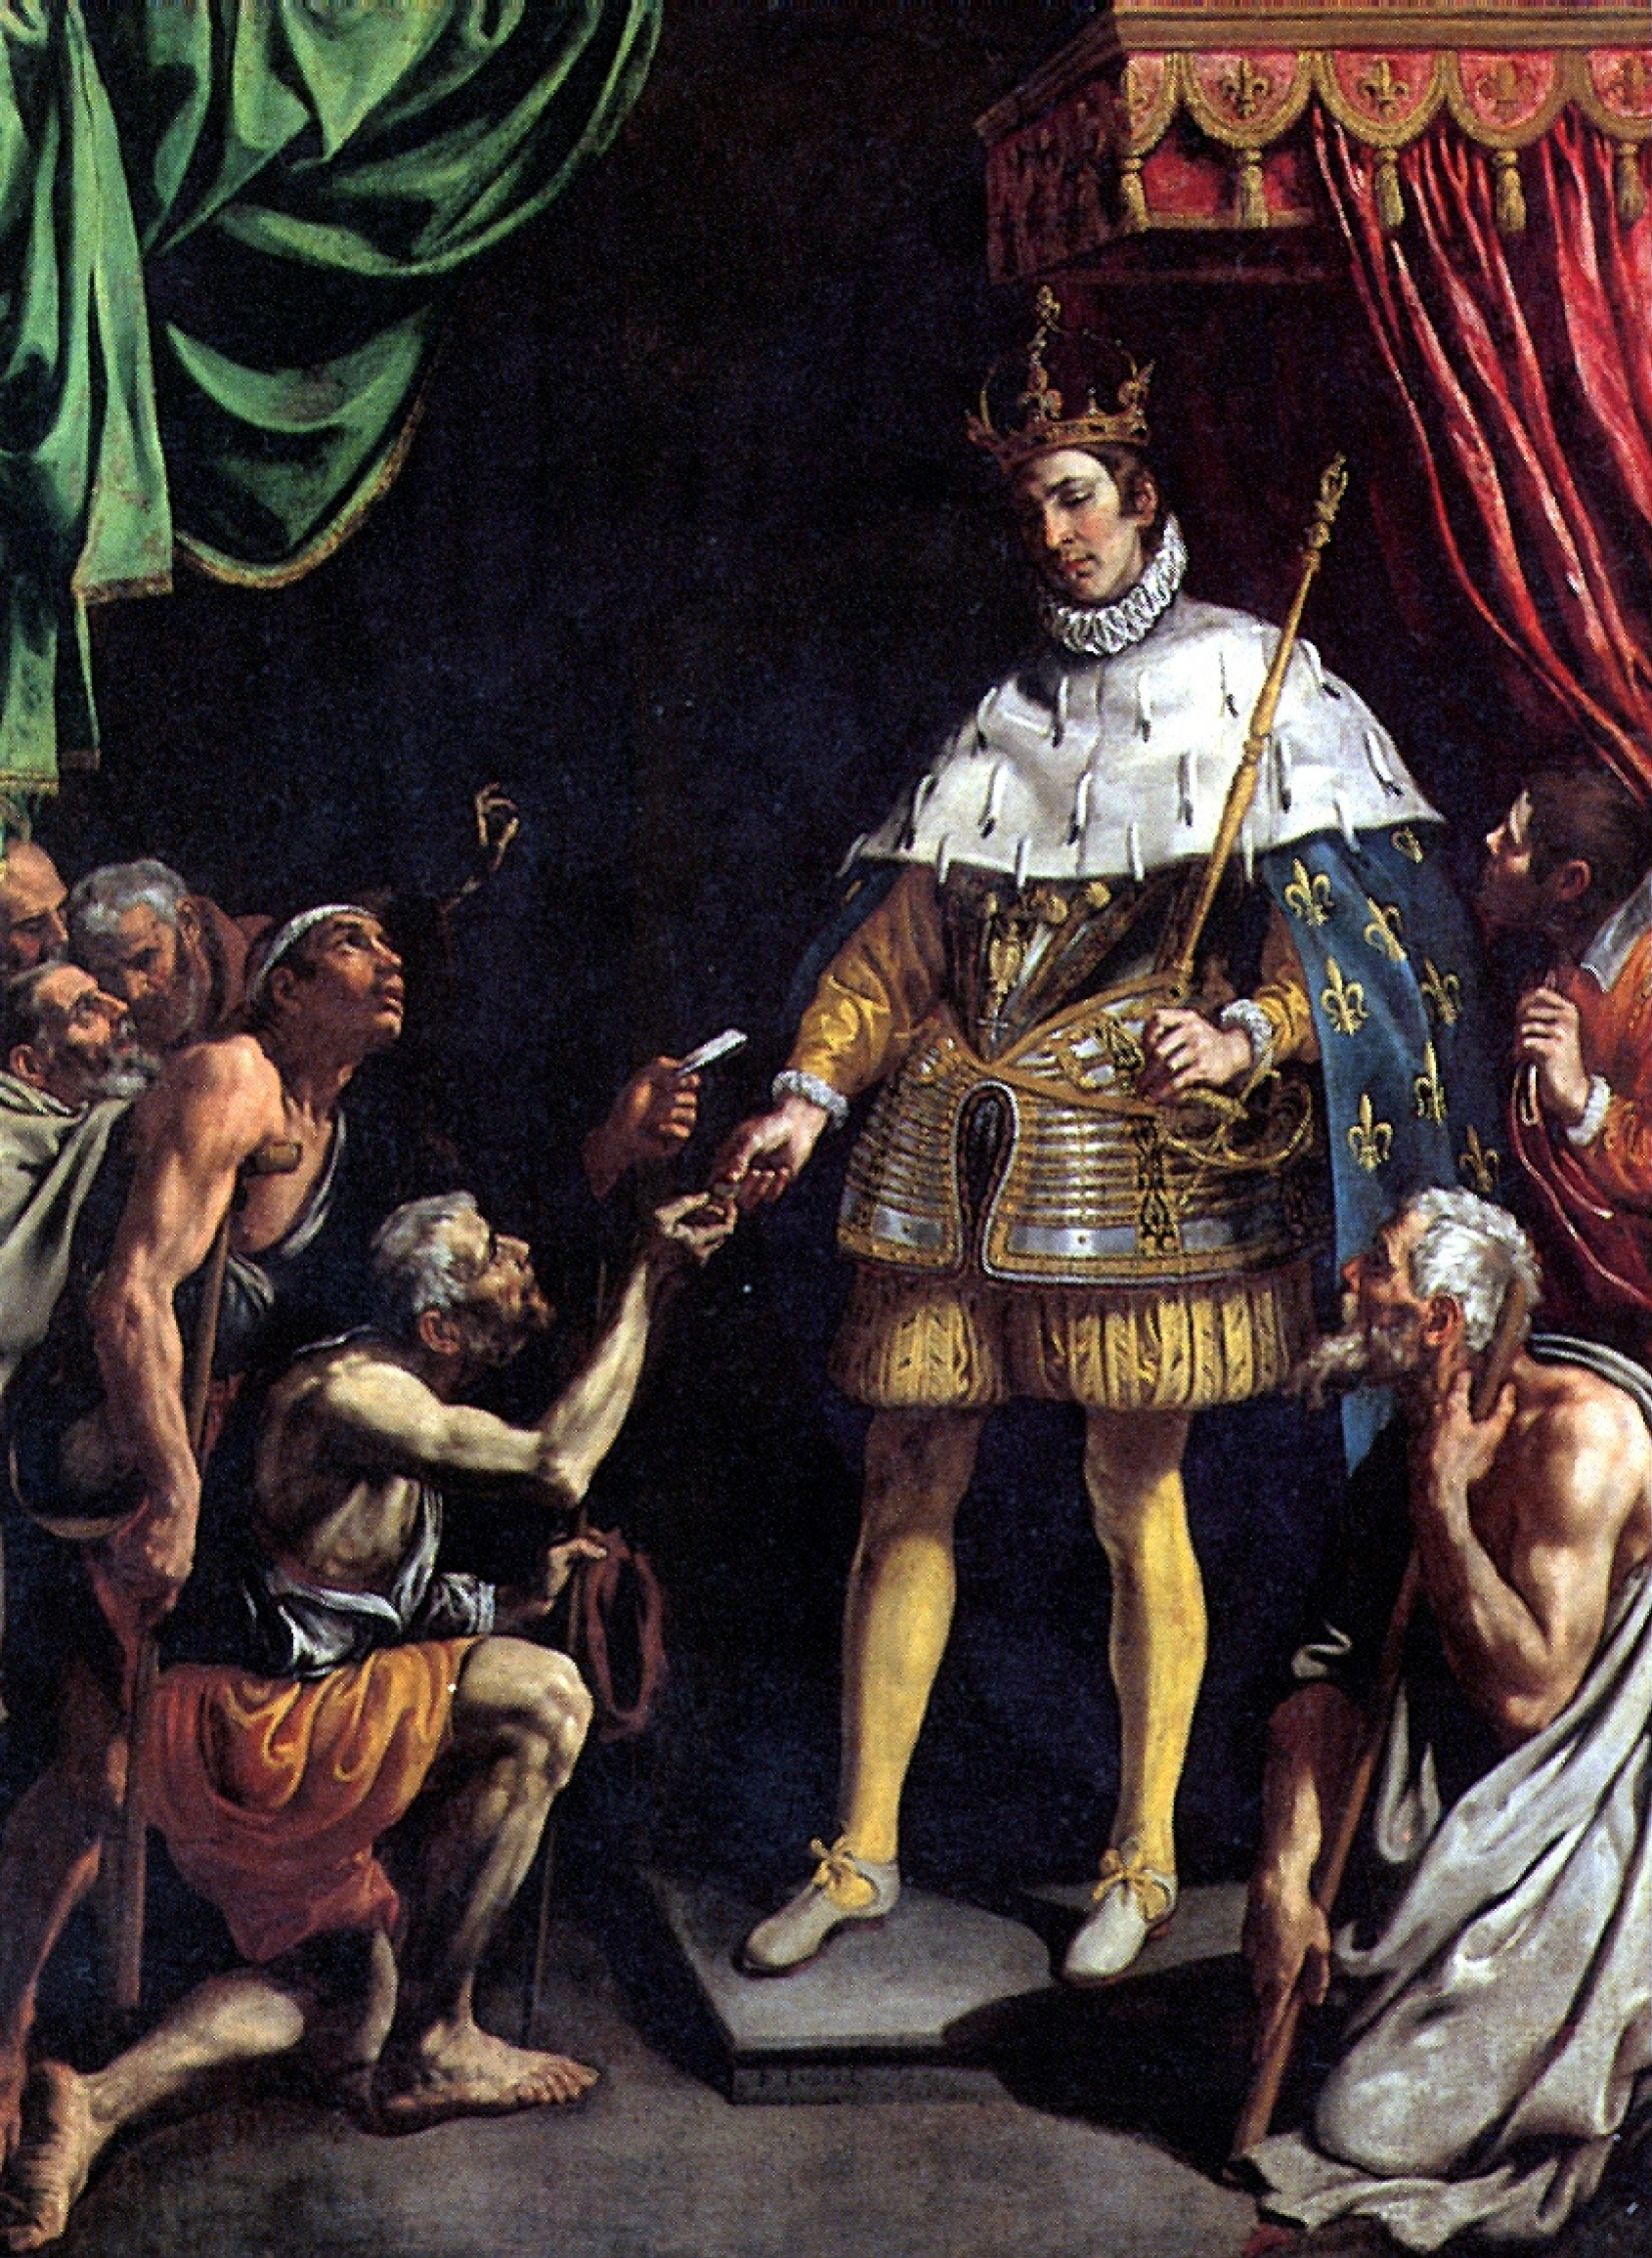 St. Louis king of France distributing alms, 245×183 cm by Luis Tristan de  Escamilla: History, Analysis & Facts